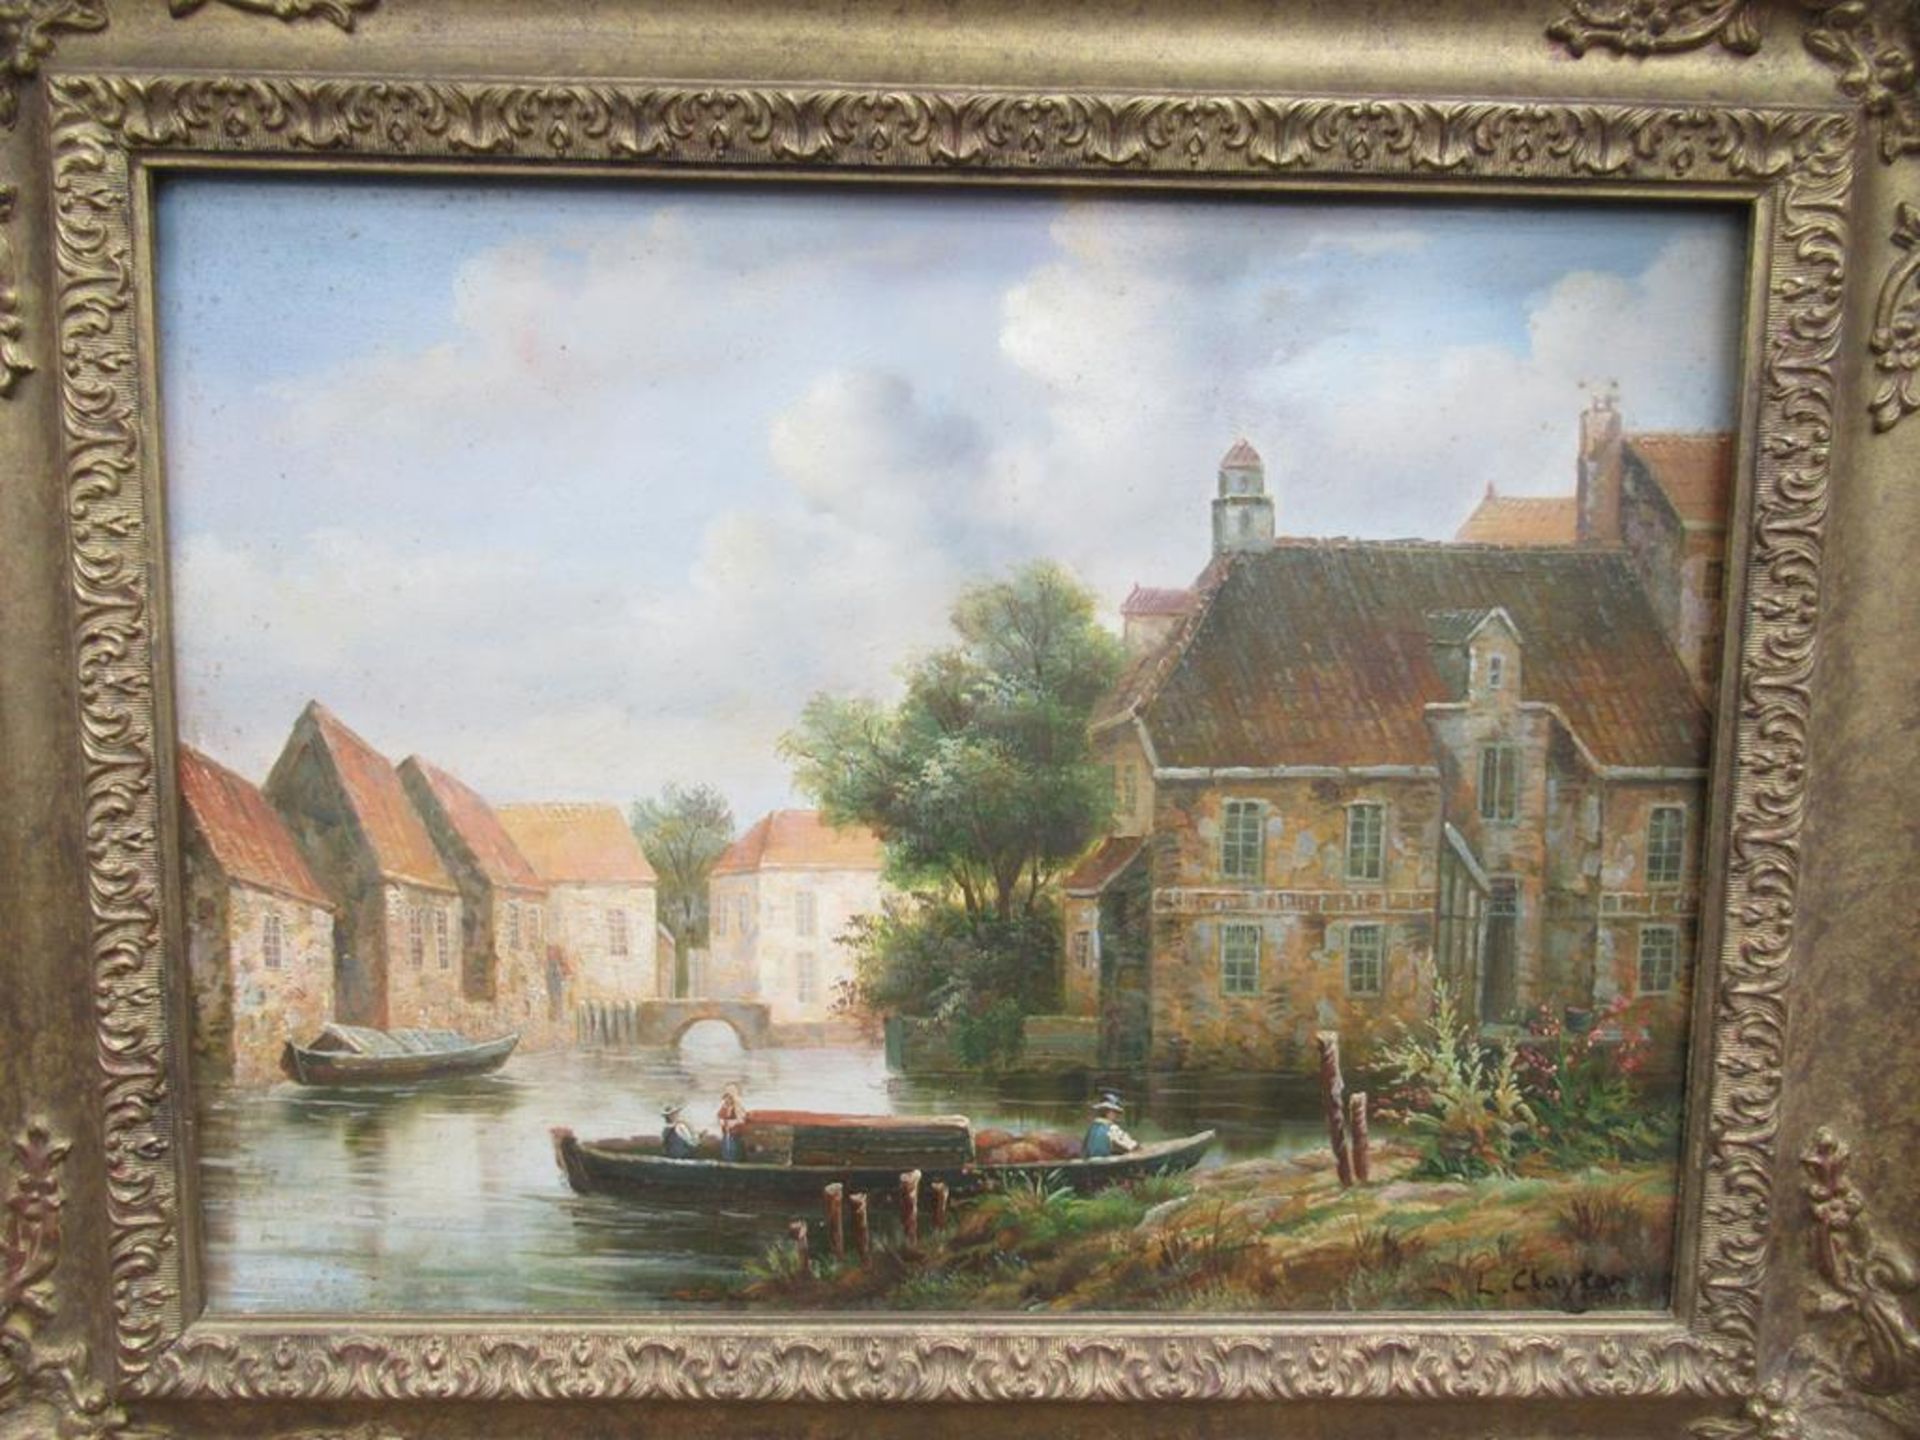 Oil on Board of Town on River Signed L. Clayton 1900 in Frame (39cm x 29cm) - Image 2 of 3